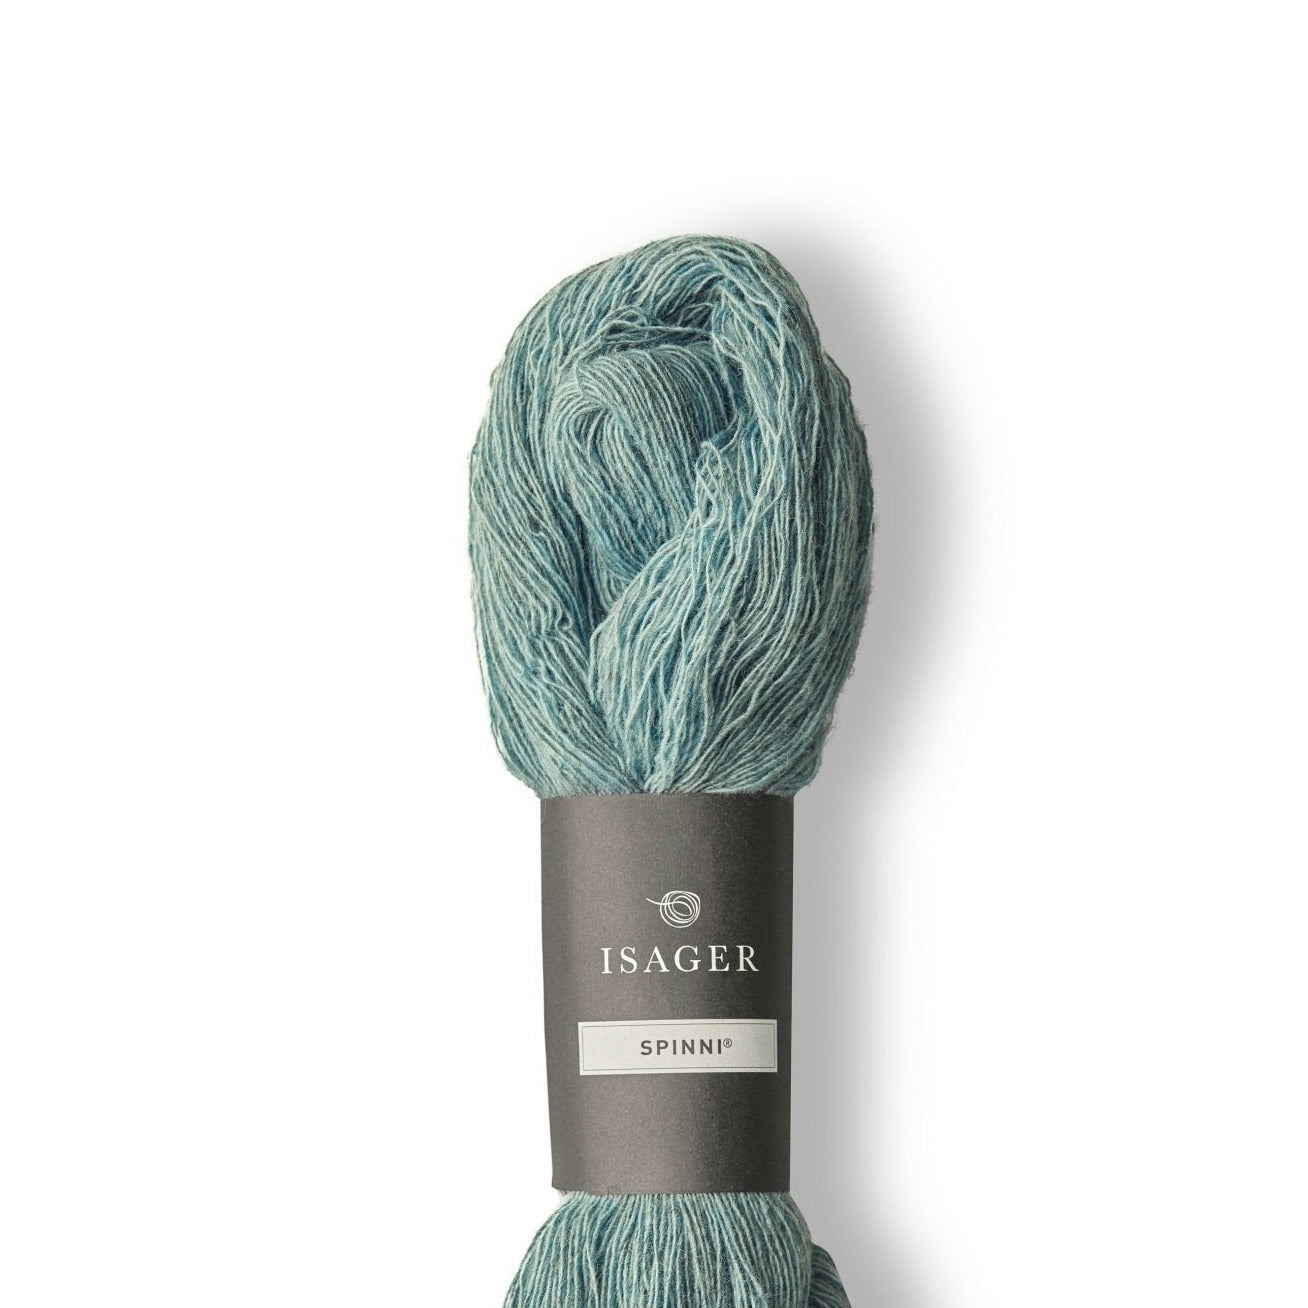 Isager Spinni - 11s - 2 Ply - Isager - The Little Yarn Store